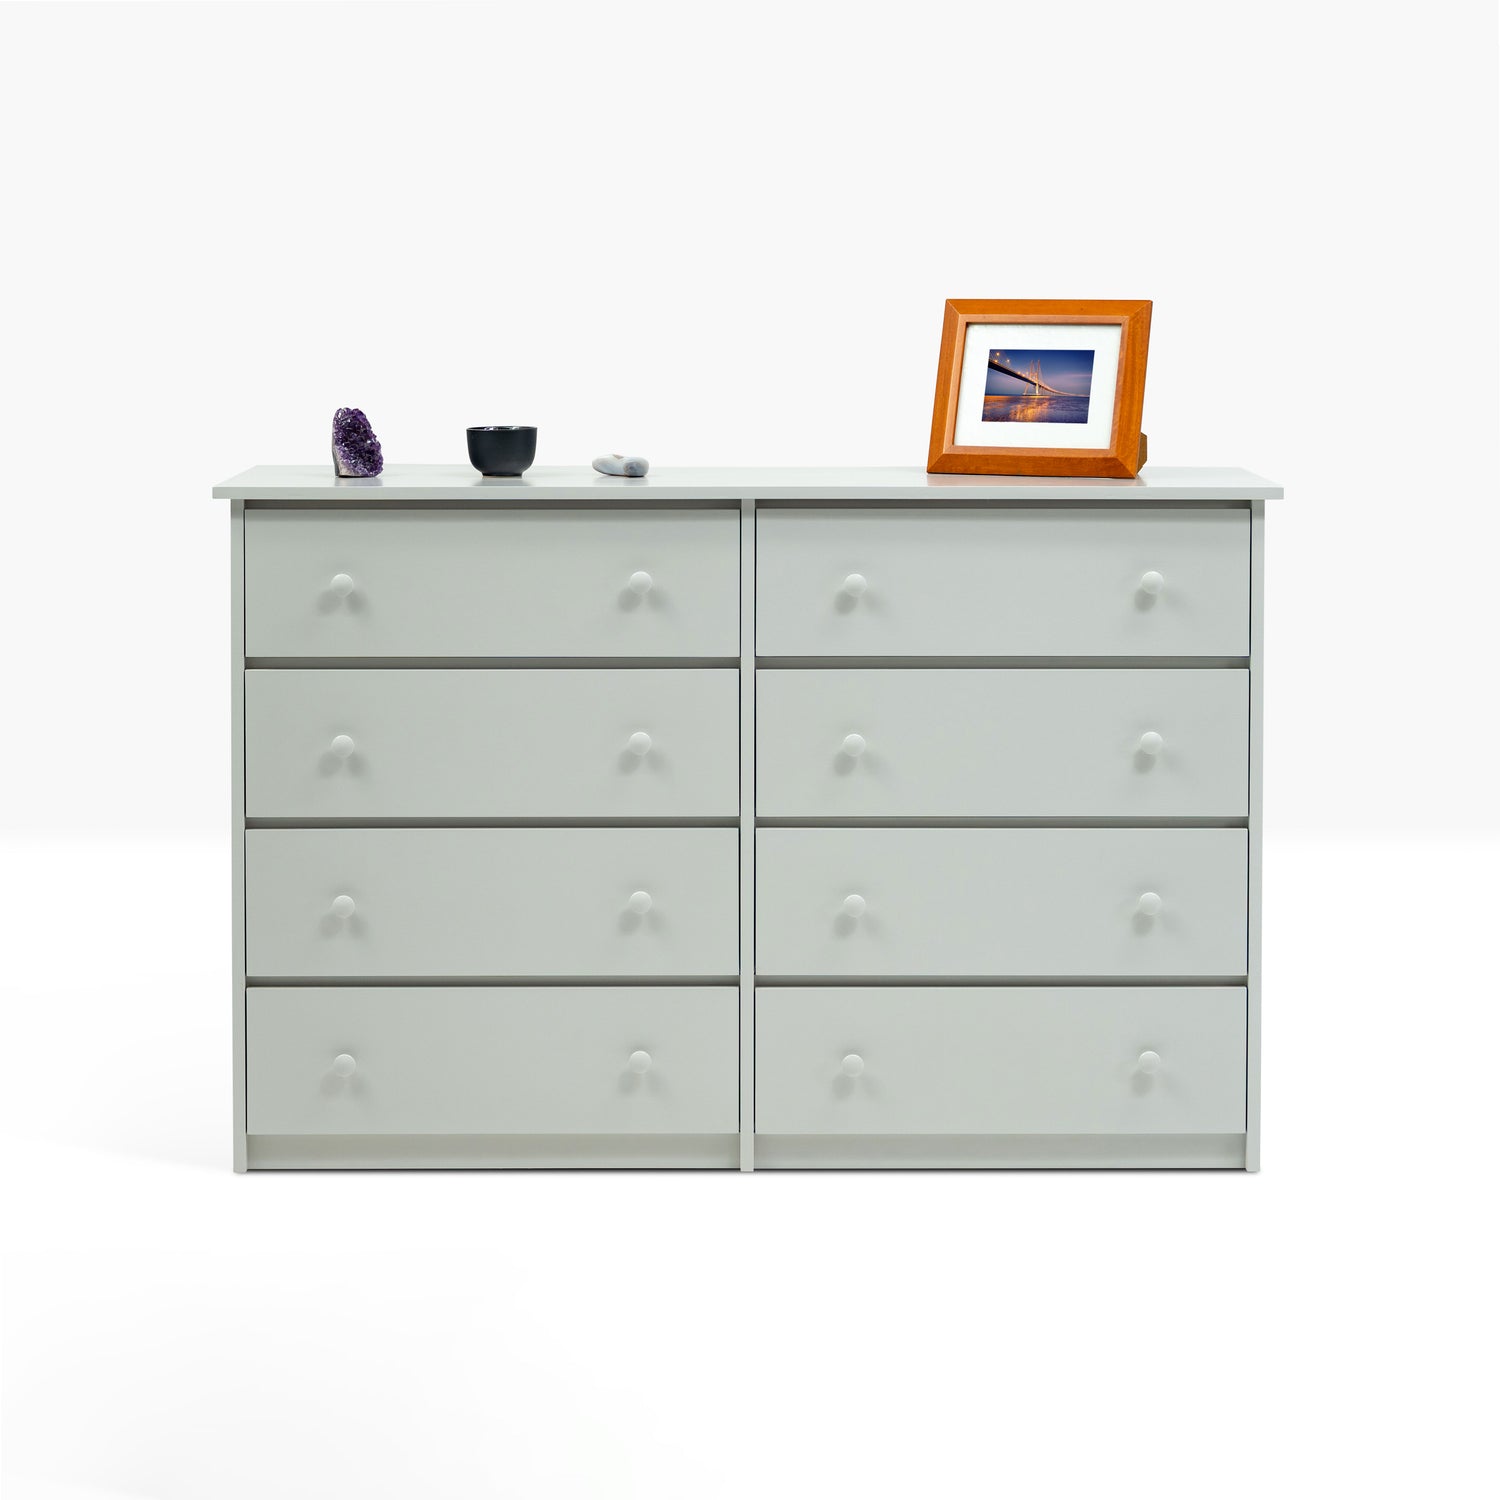 Berkshire Basic Dresser shown from the front in Stonington Gray. Features eight standard drawers.